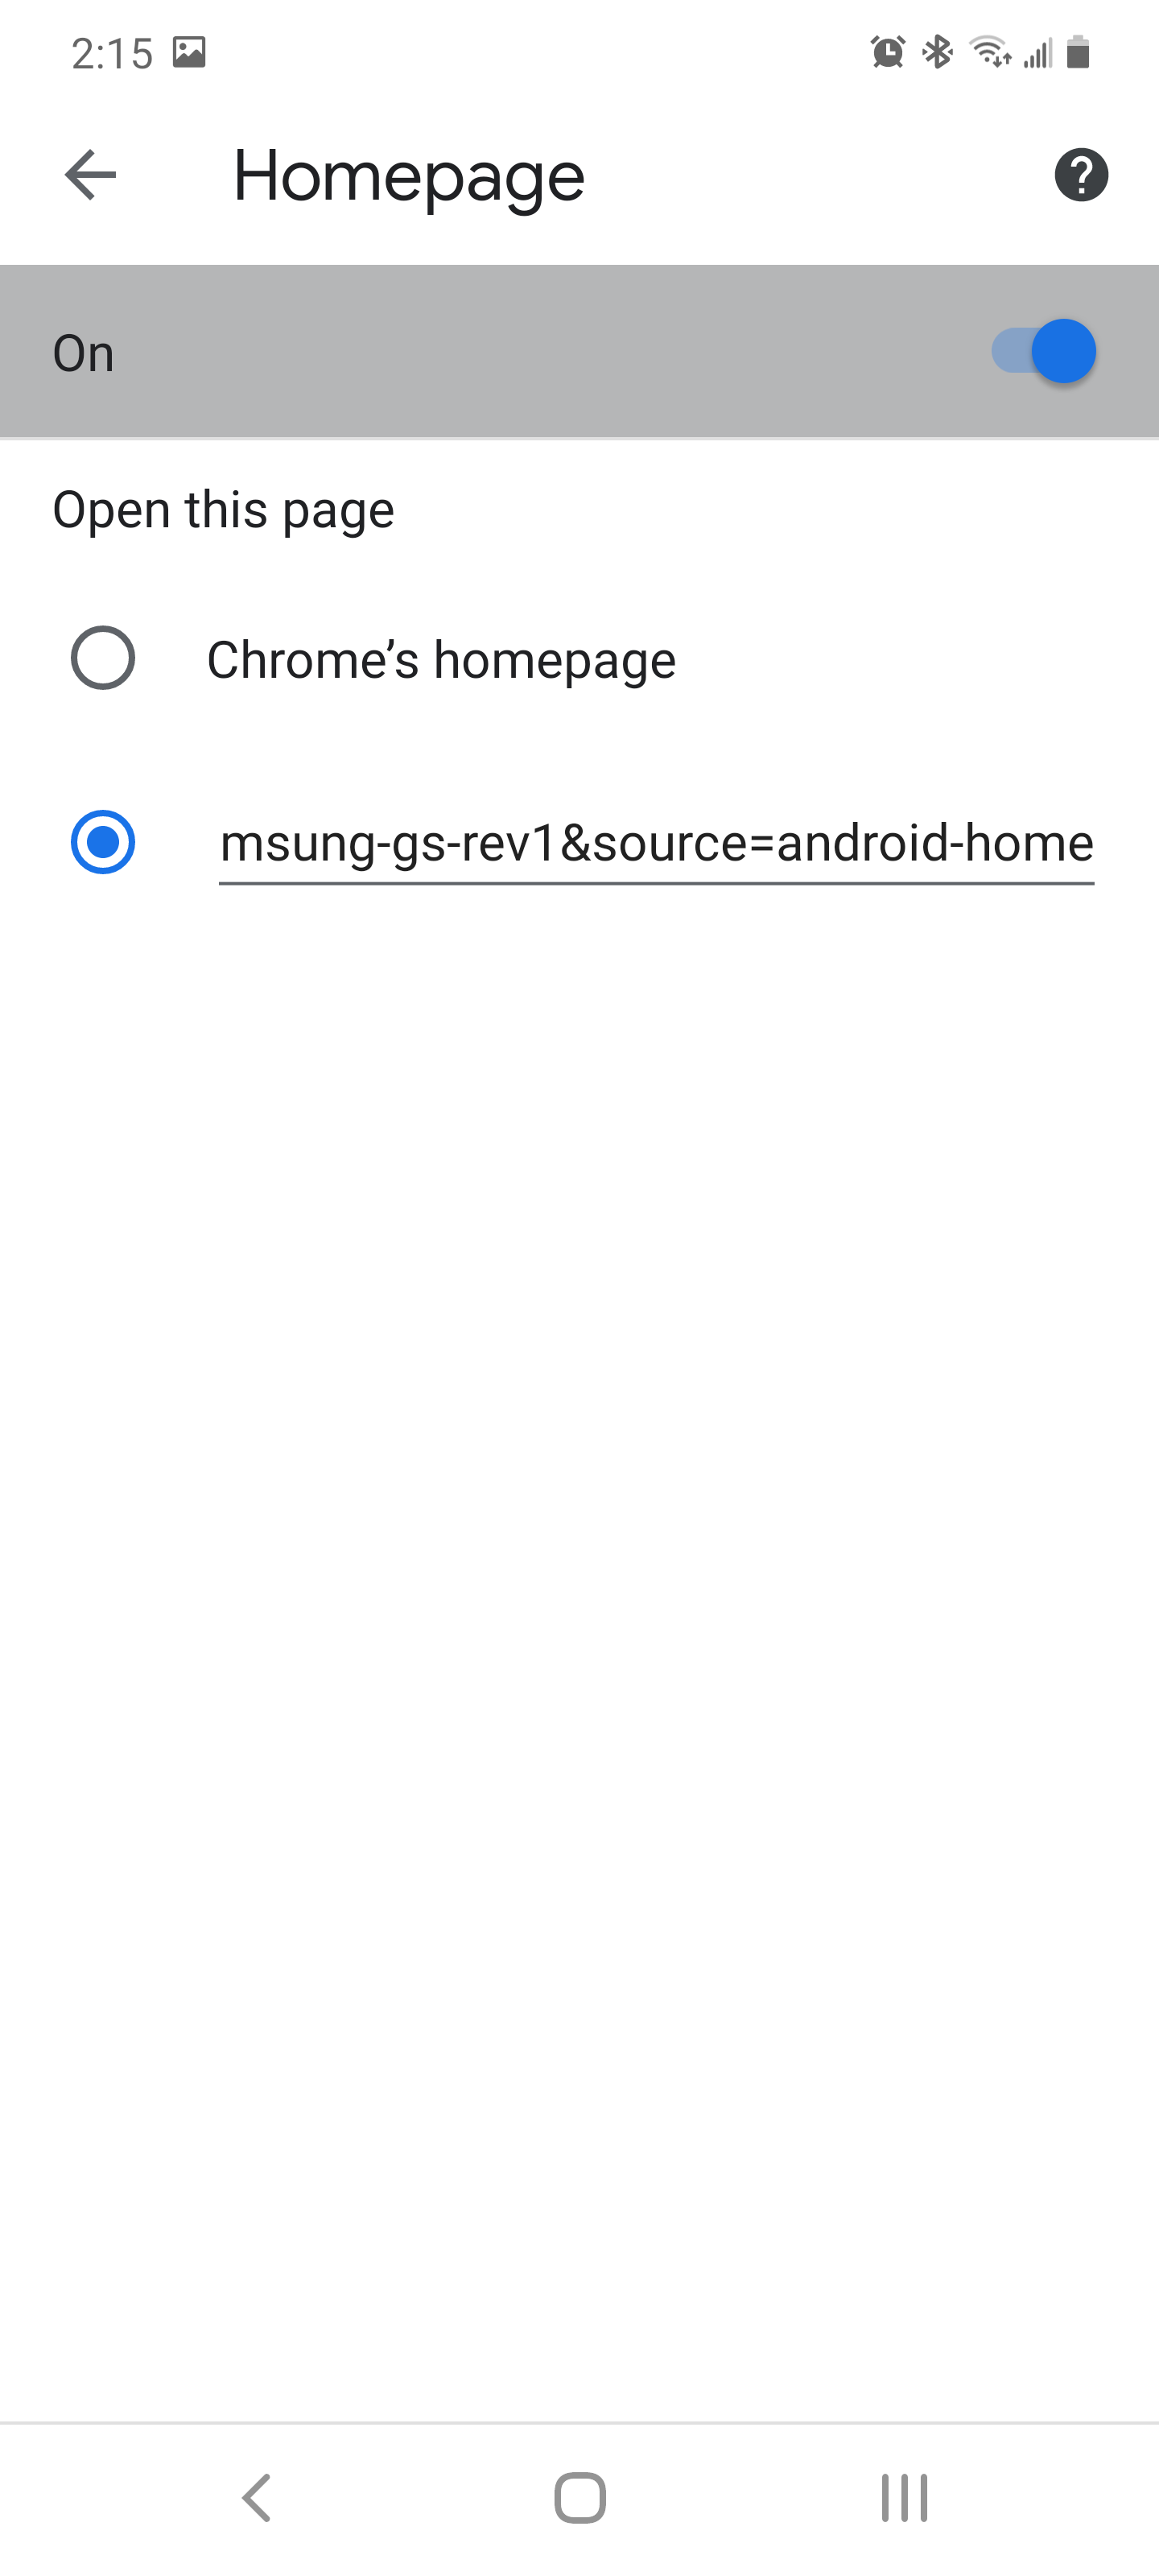 The Homepage settings in the Google Chrome mobile app